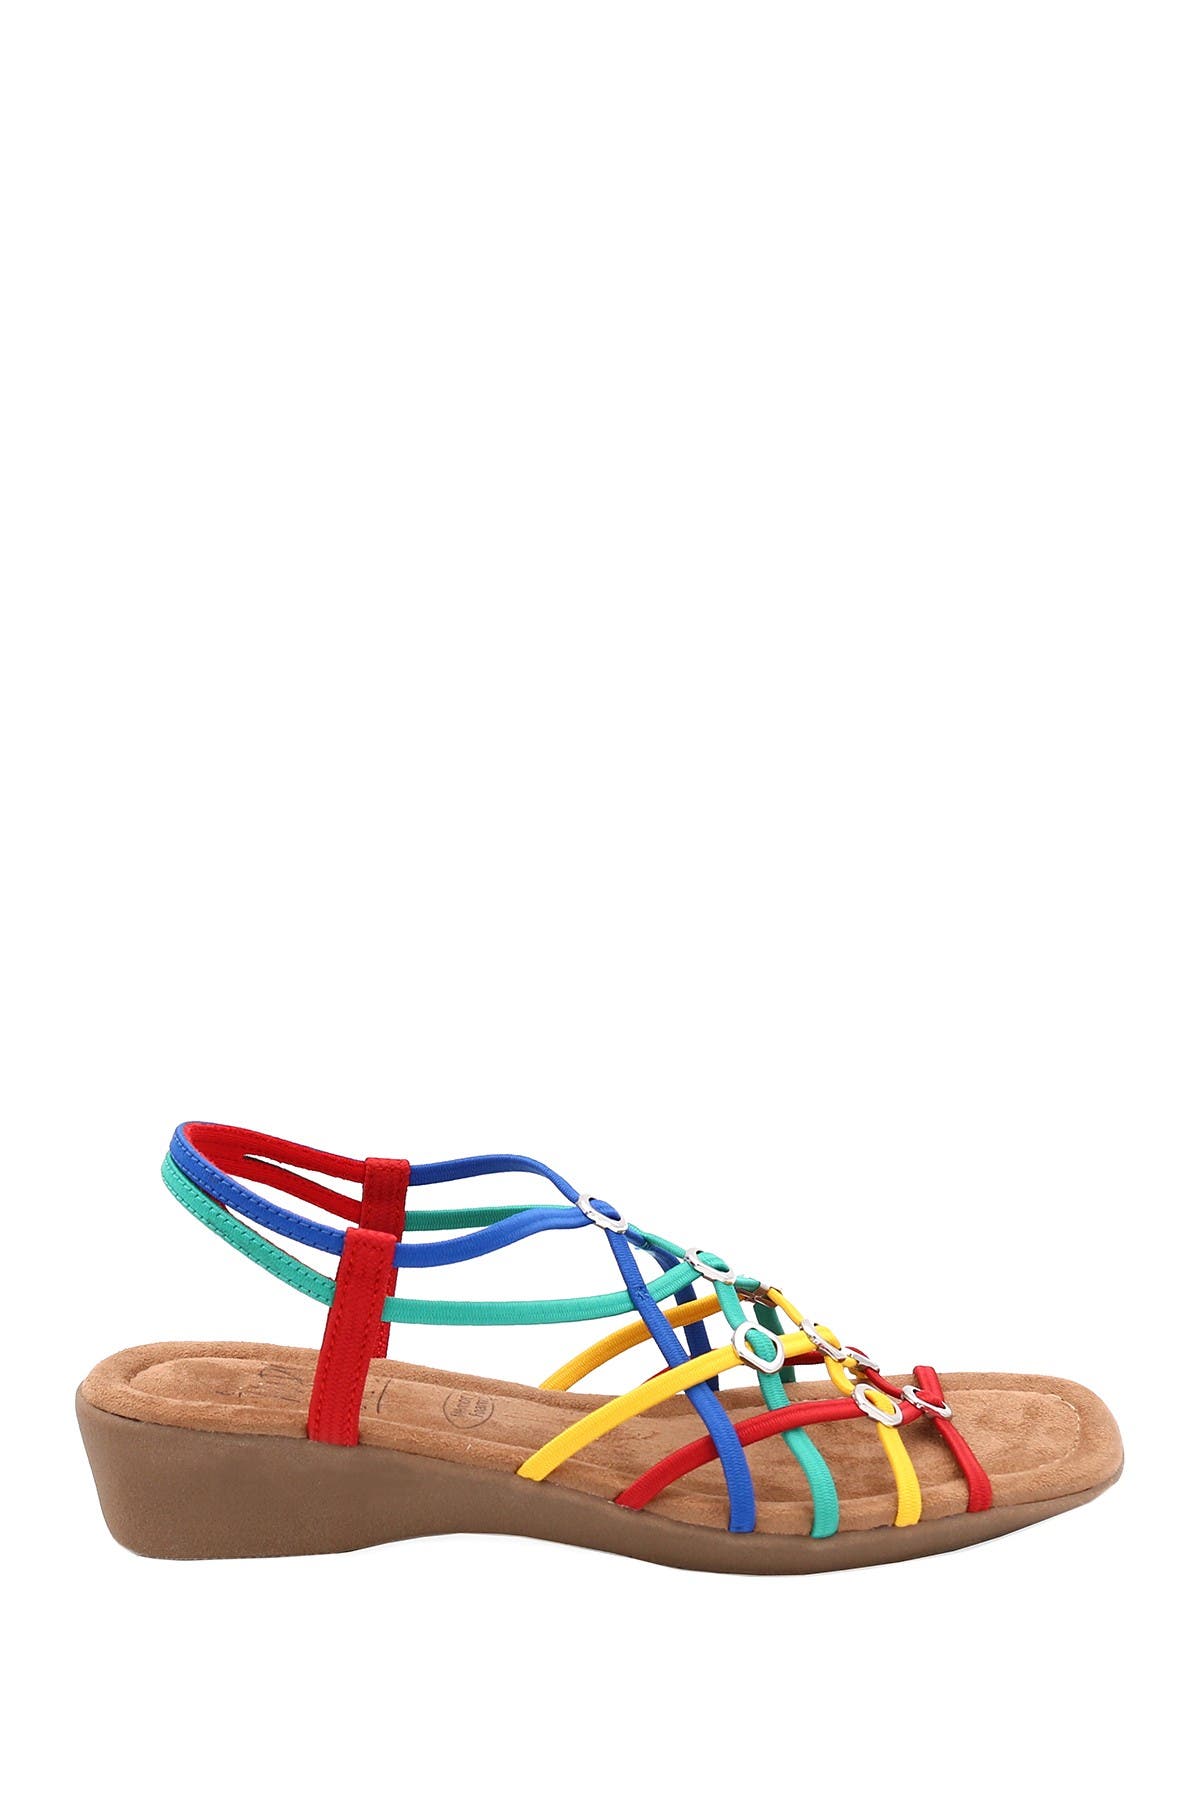 Impo Rowley Stretch Detailed Sandal In Fiesta Mul